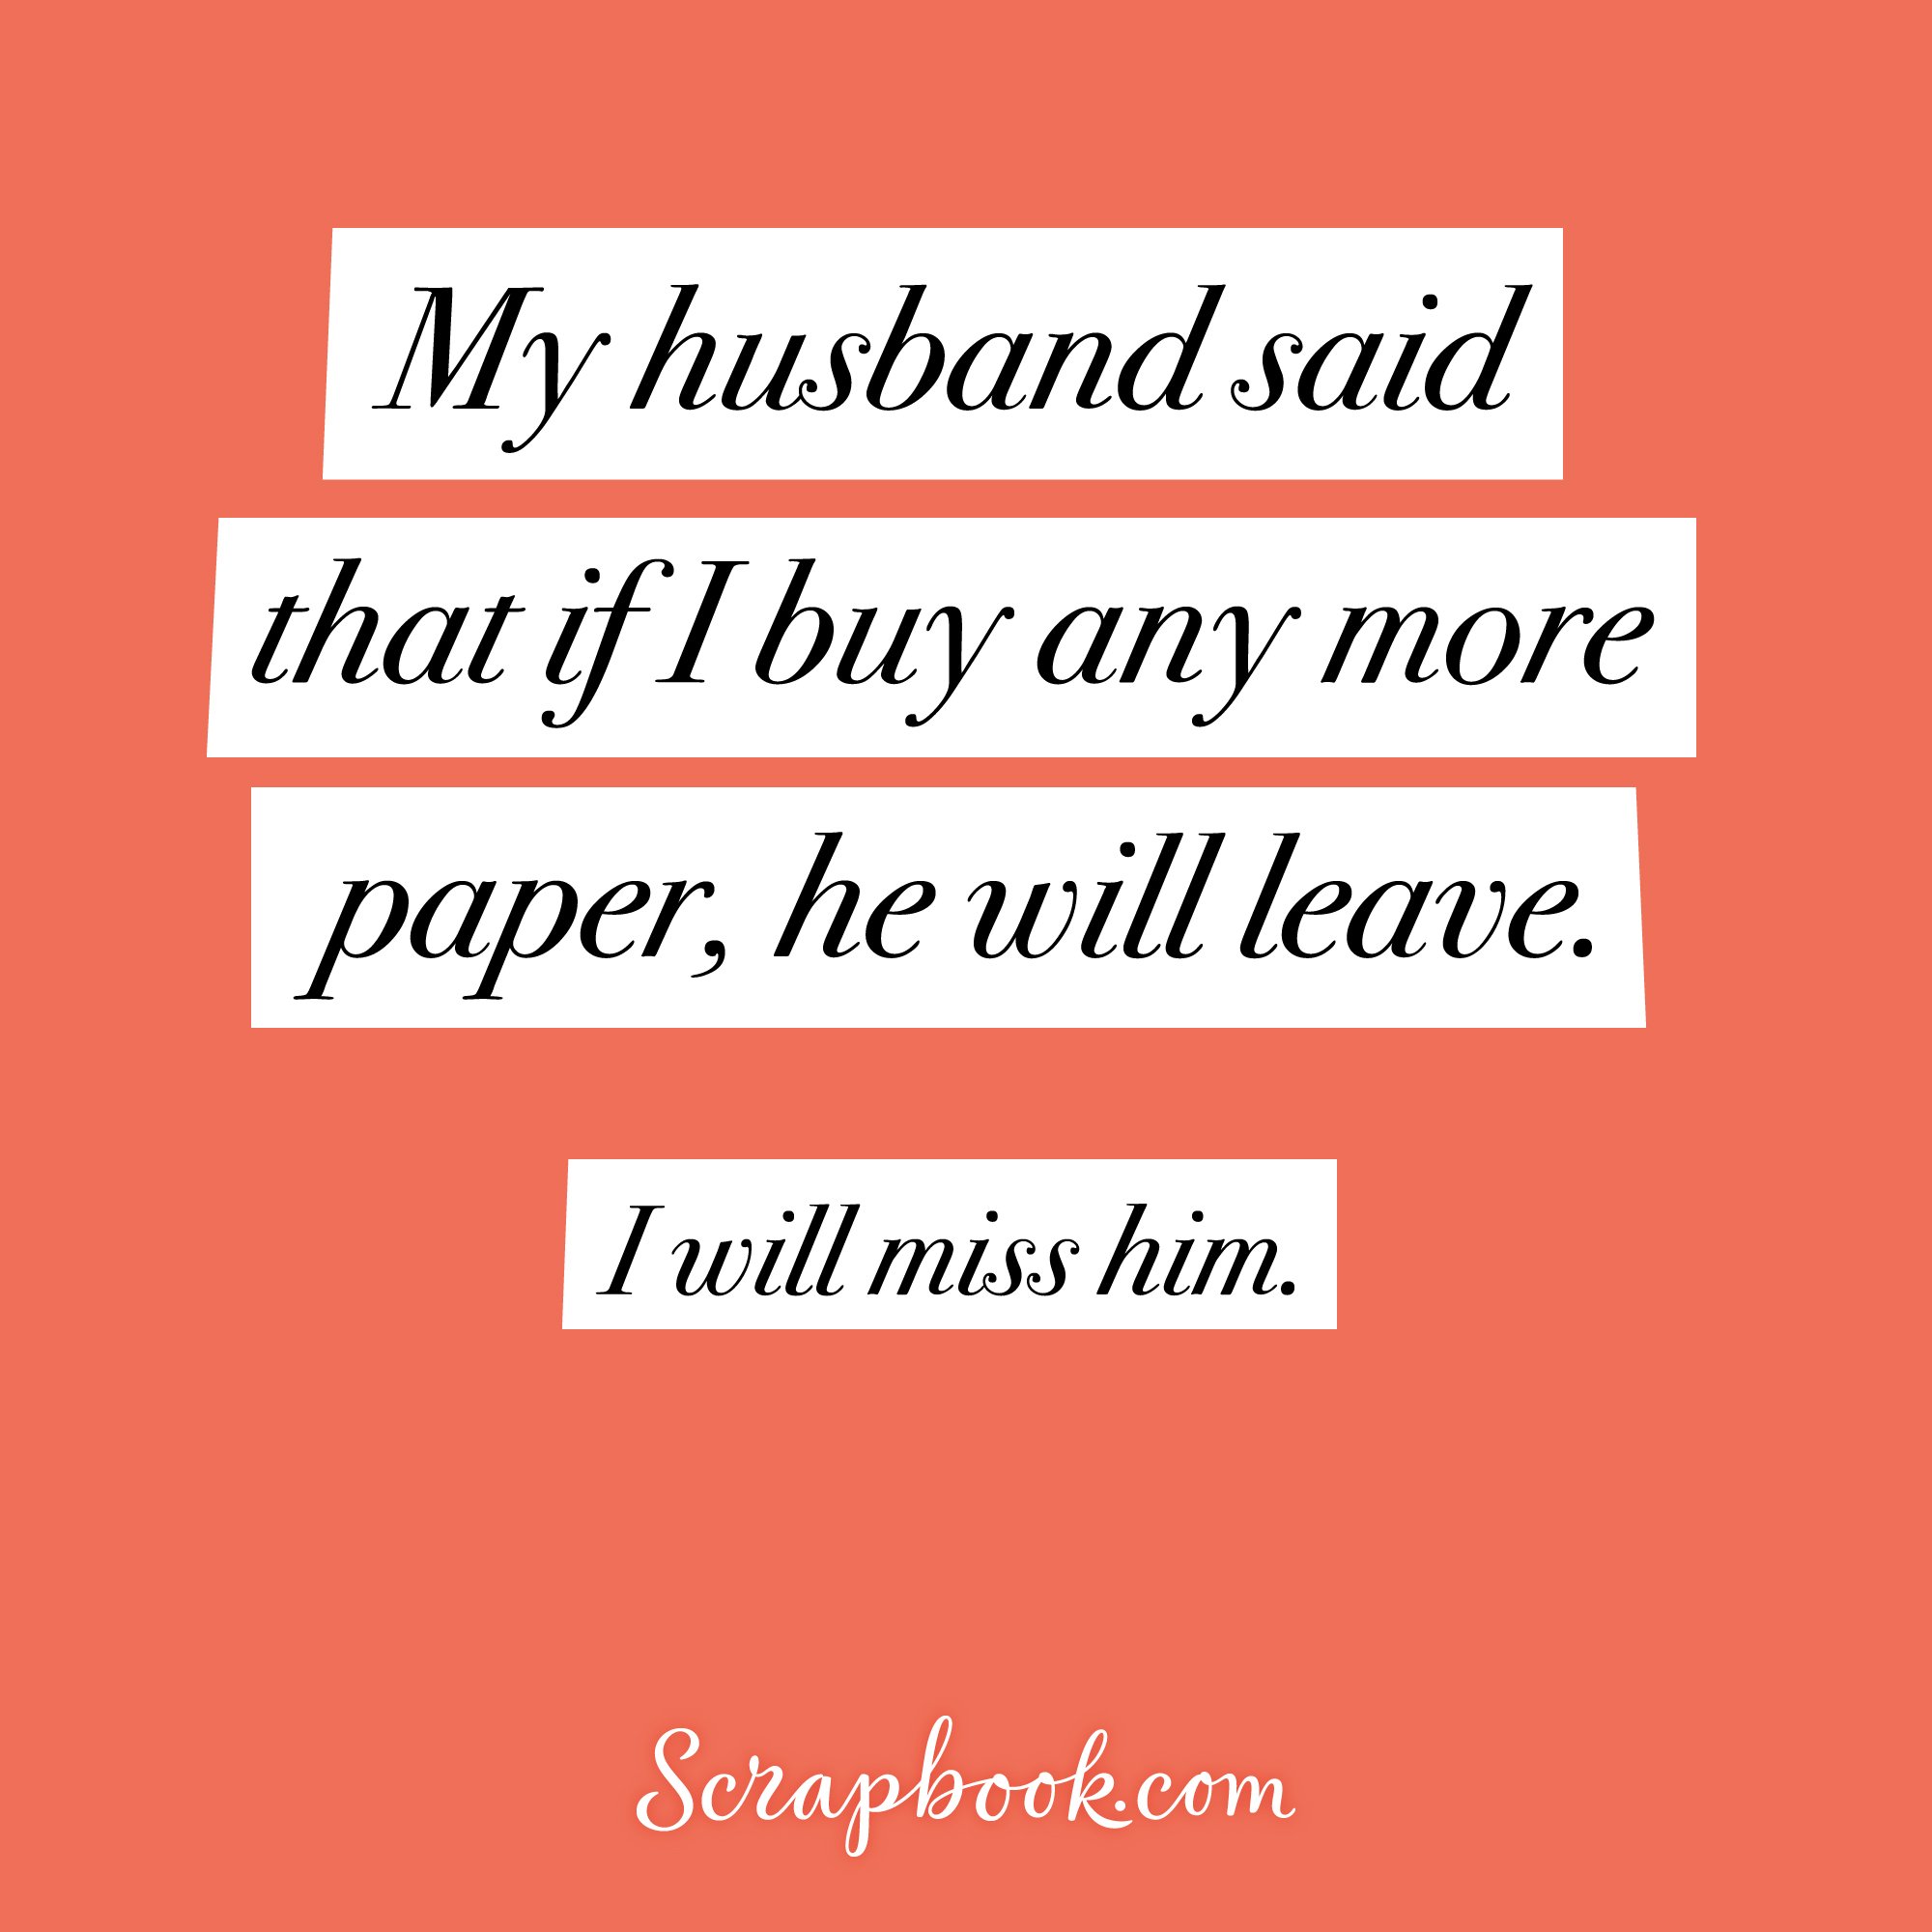 My husband said that if I buy any more paper, he will leave. I will miss him.